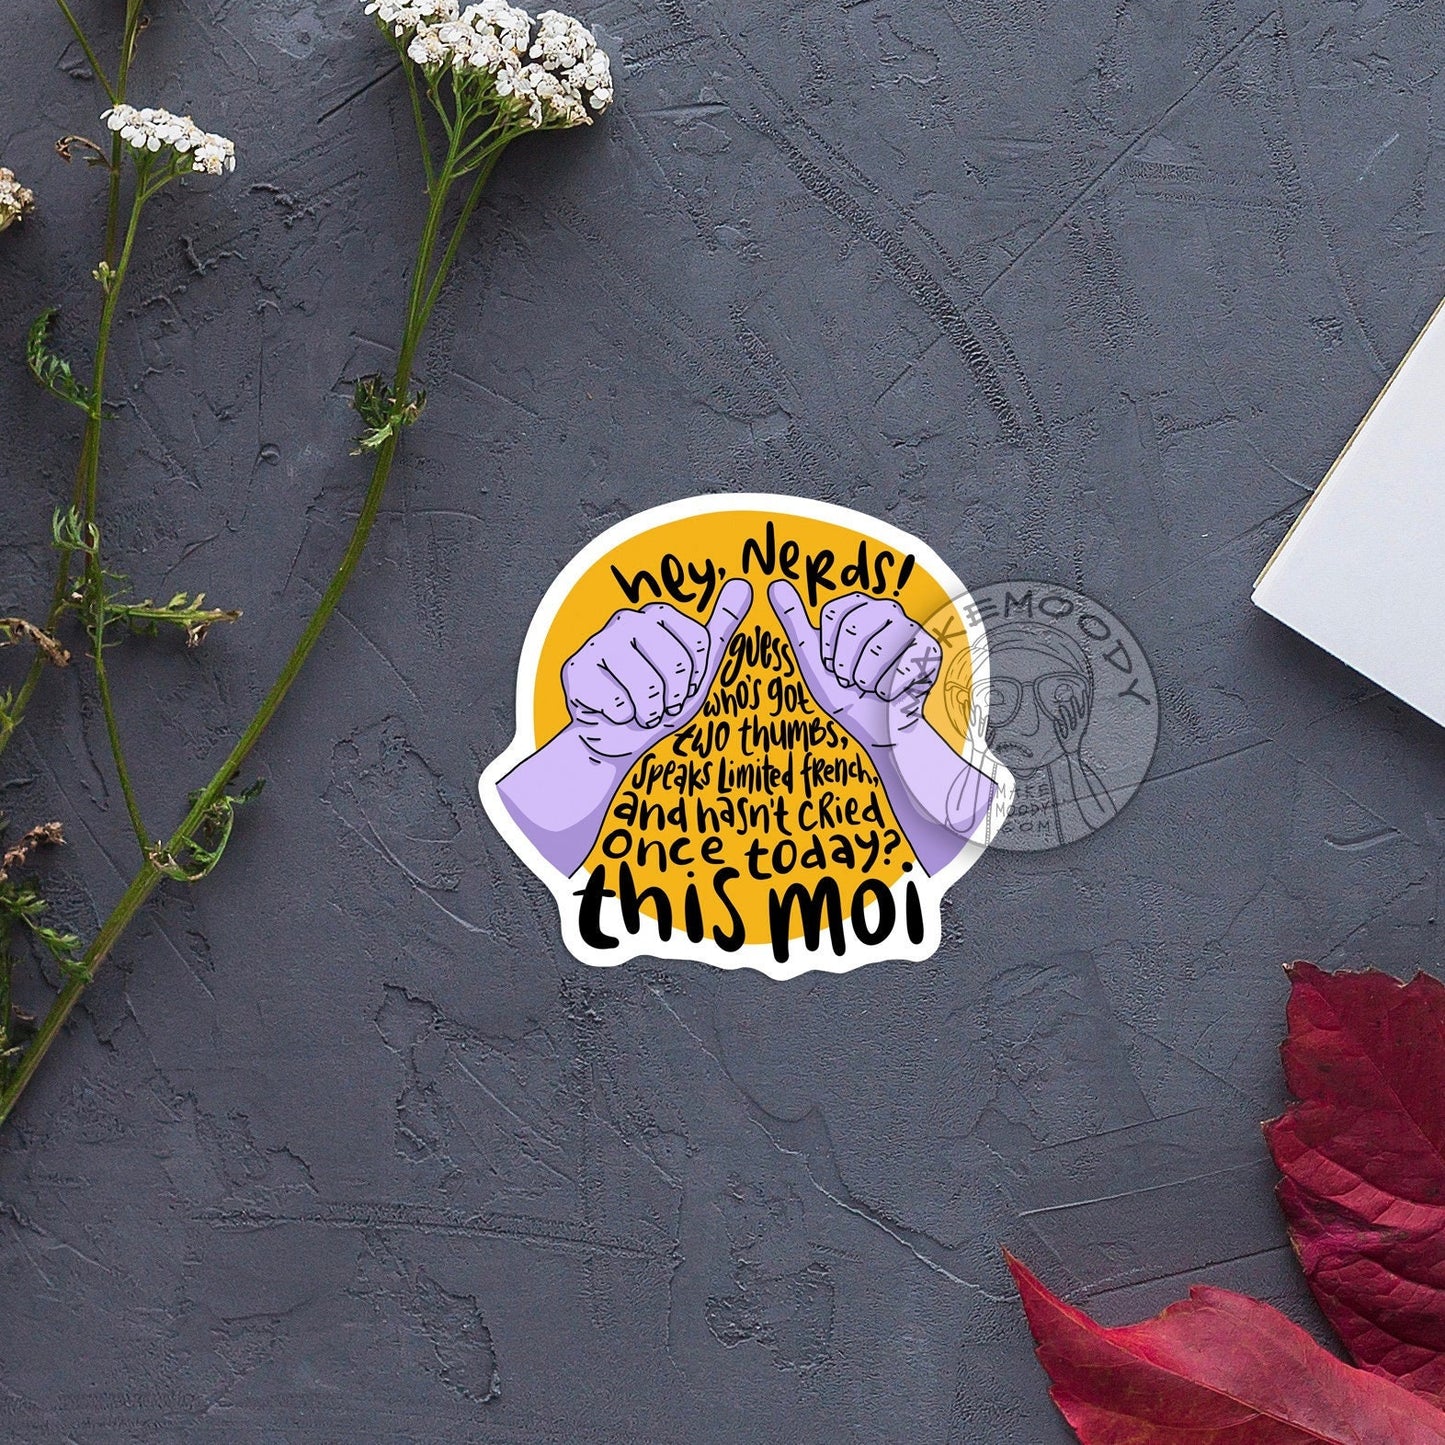 30 Rock This Moi STICKER - Vinyl Decal Sticker - Two Thumbs Sticker, Liz Lemon Sticker, 30 Rock Sticker, Tina Fey Sticker, Limited French